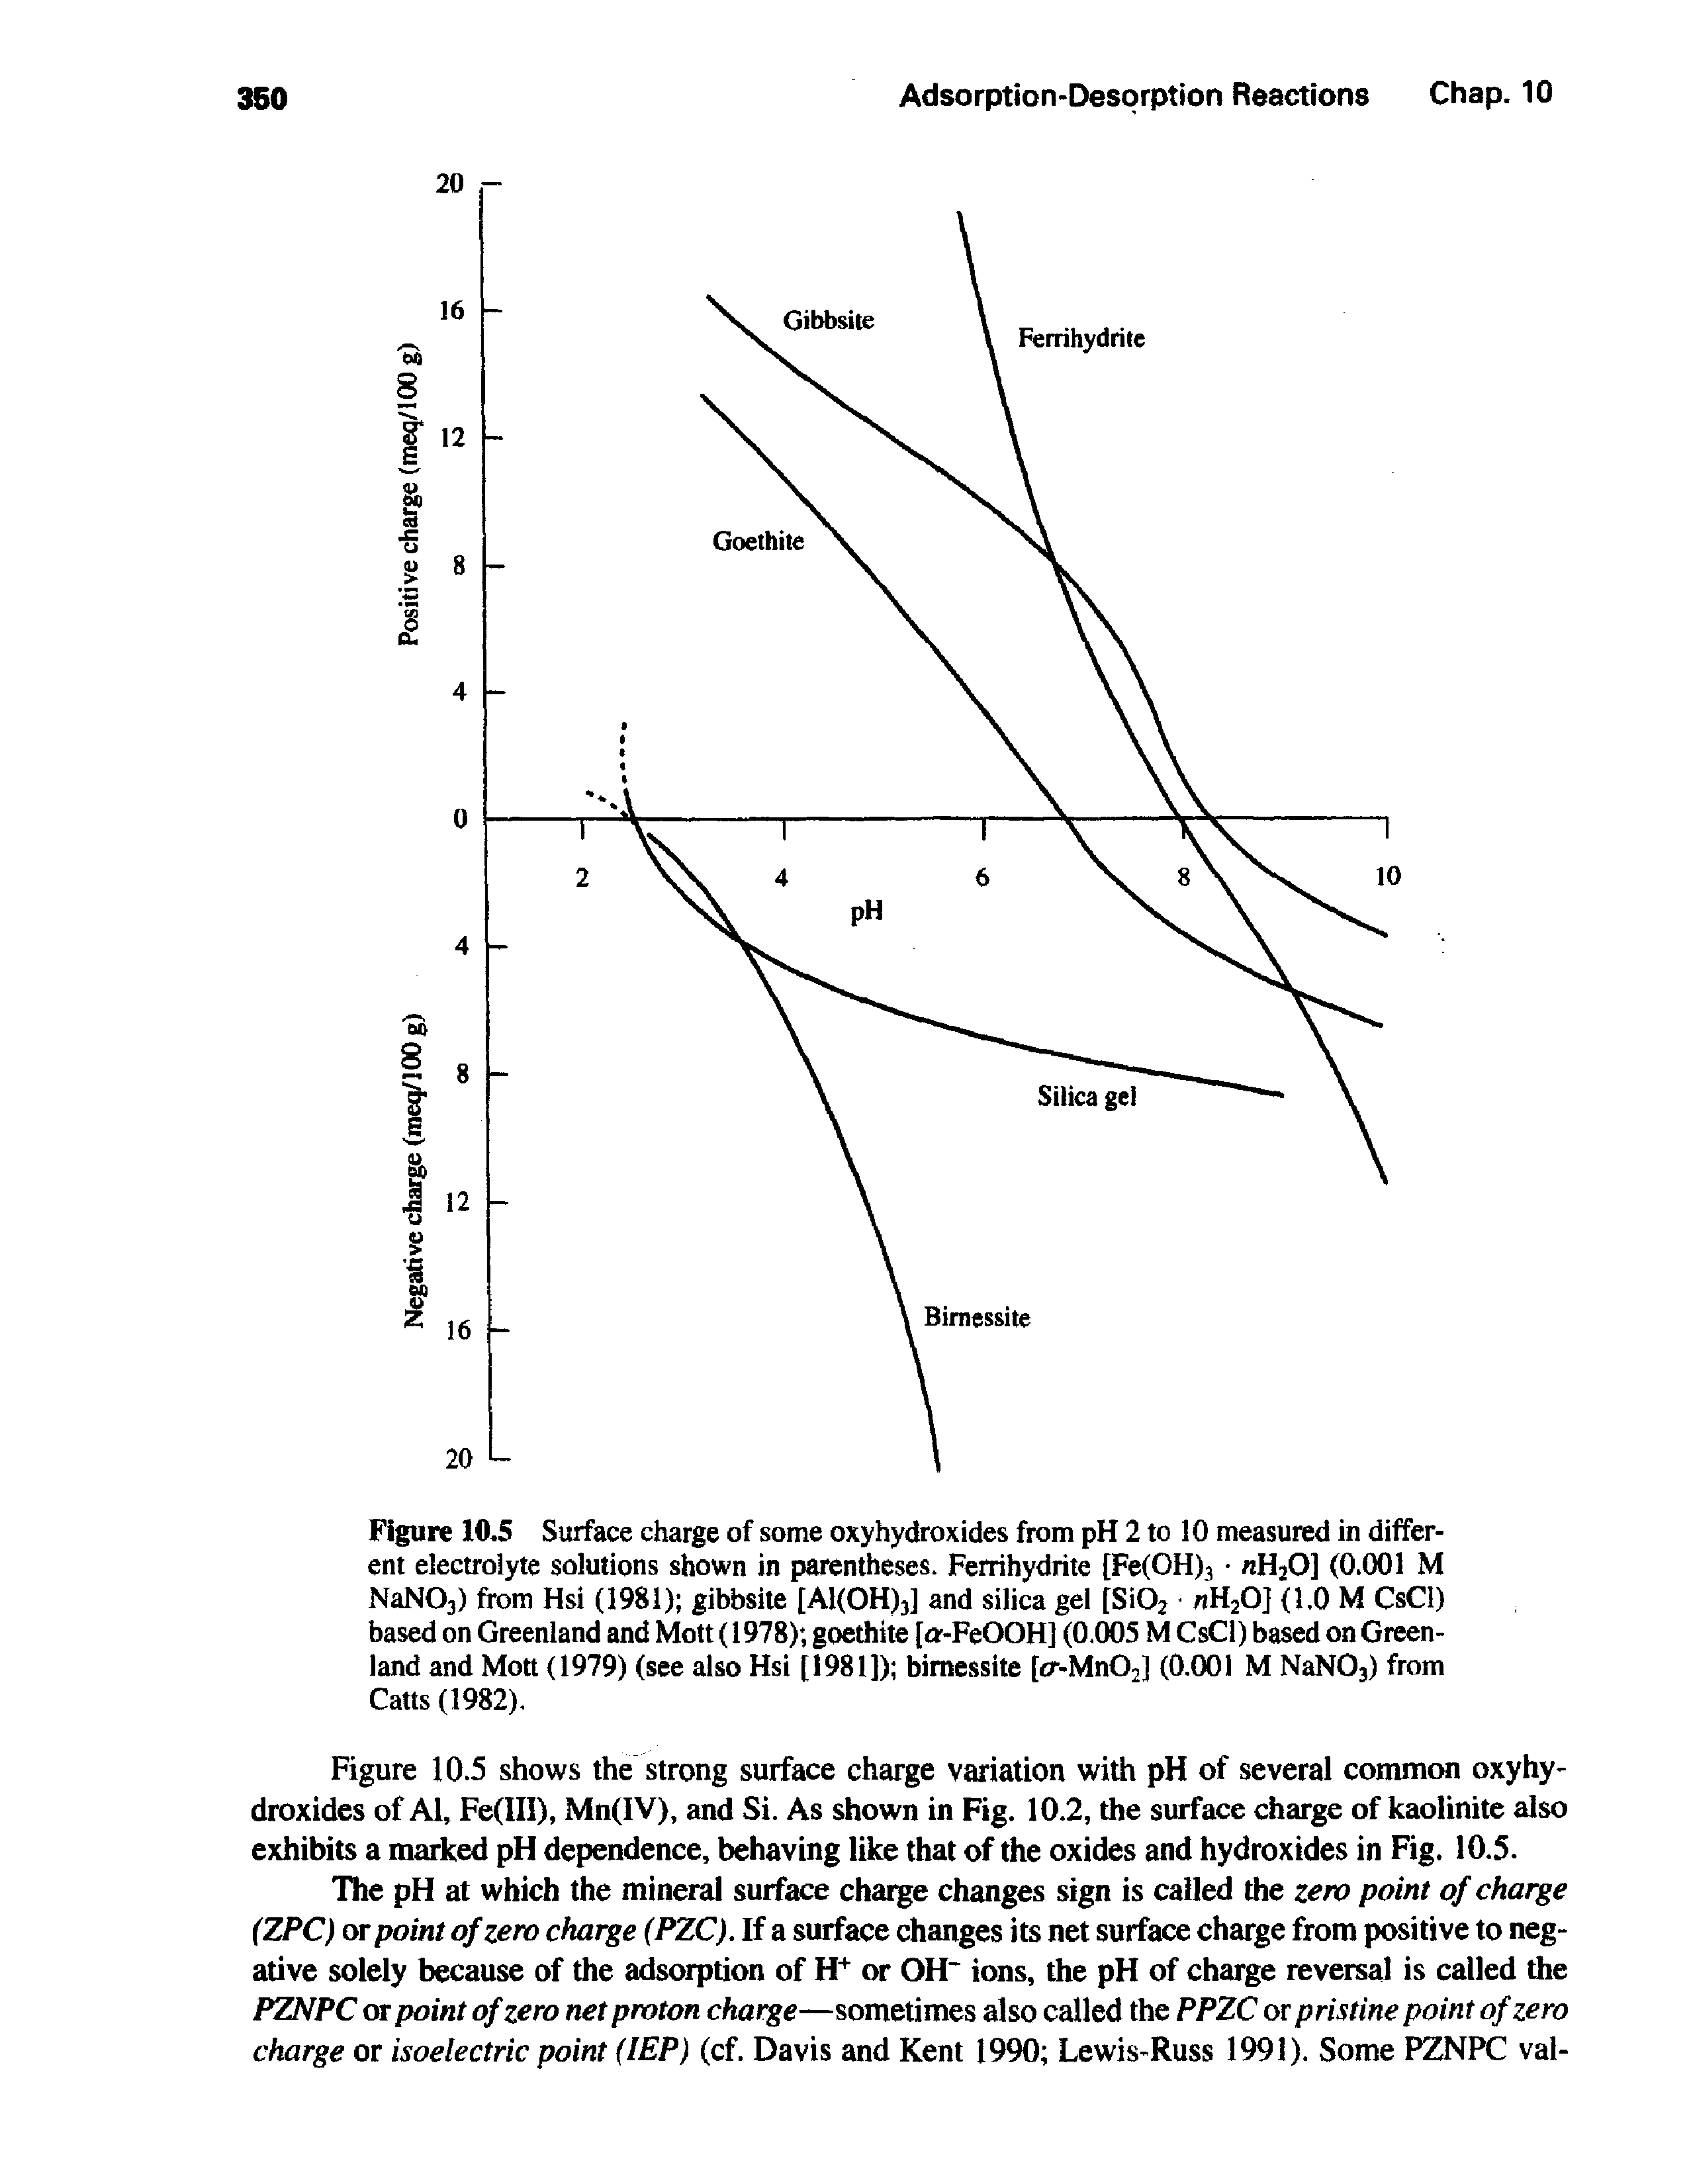 Figure 10.5 Surface charge of some oxyhydroxides from pH 2 to 10 measured in different electrolyte solutions shown in parentheses. Ferrihydrite [Fe(OH)3 nH20] (0.001 M NaN03) from Hsi (1981) gibbsite [Al(OH)3] and silica gel [Si02 nH20] (1.0 M CsCl) based on Greenland and Mott (1978) goethite [o -FeOOH] (0.005 M CsCl) based on Greenland and Mott (1979) (see also Hsi [1981]) bimessite [cr-Mn02] (0.(X)1 M NaNOs) from Catts (1982).